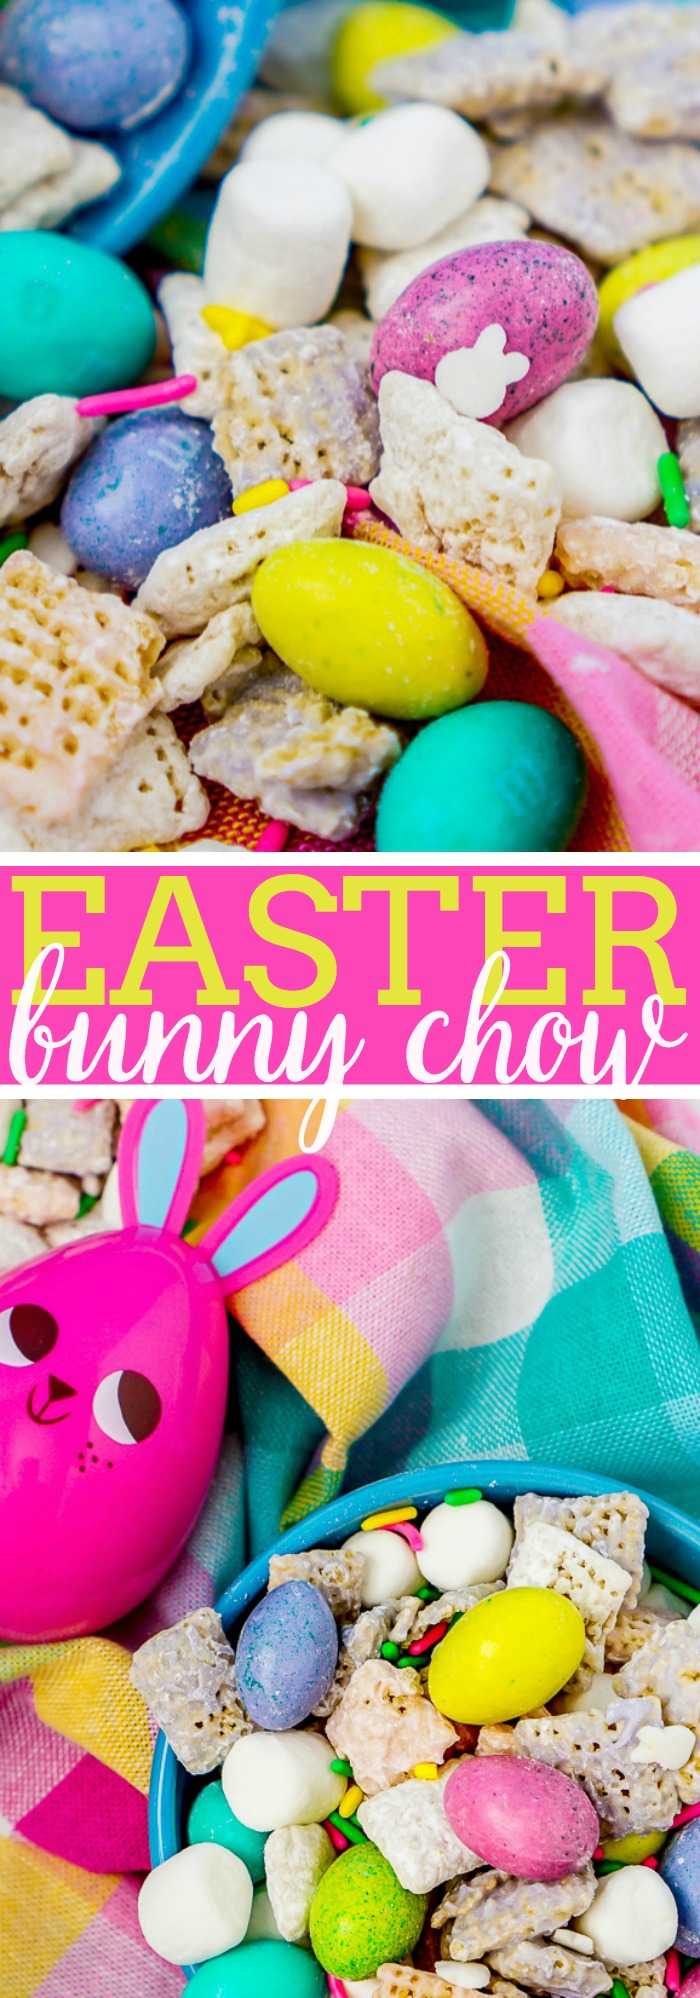 Easter Bunny Chow Recipe - An easy and tasty spring puppy chow recipe the whole family will love! These muddy buddies are just too cute to pass up for the Easter holiday! | The Love Nerds